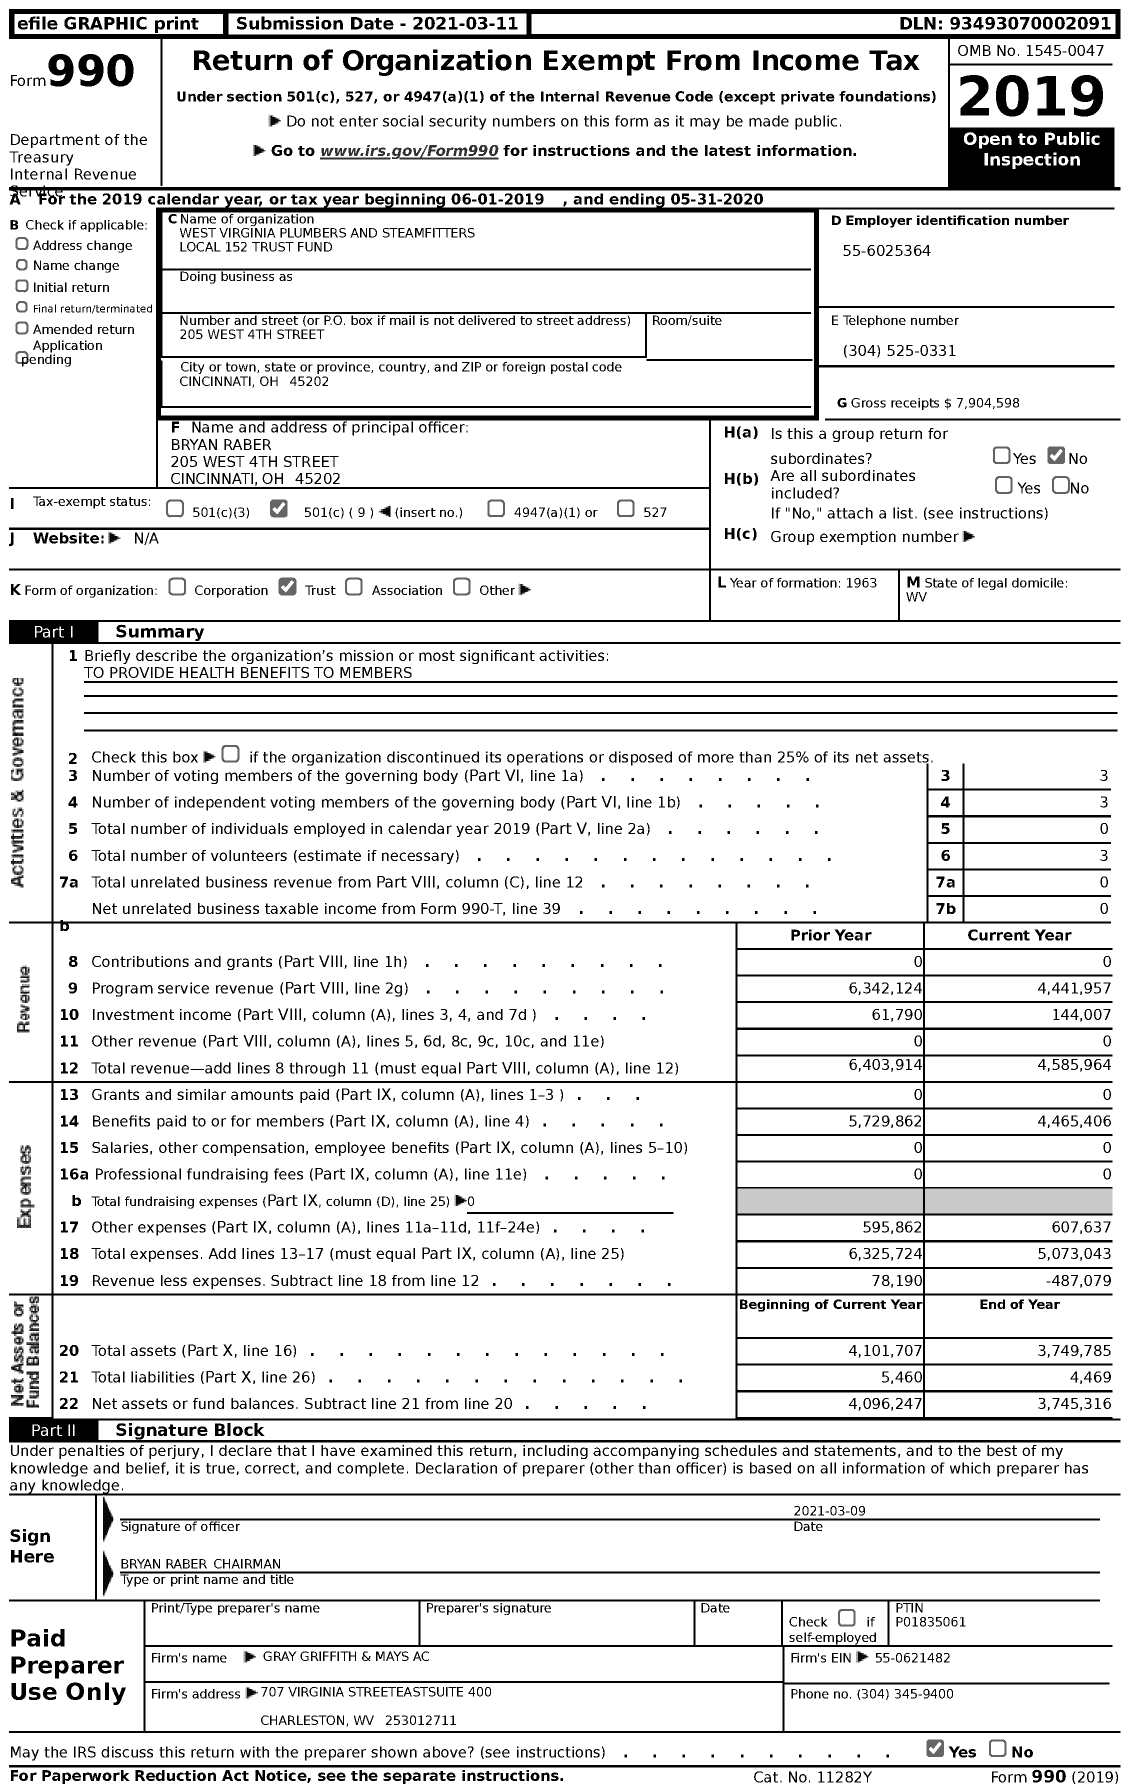 Image of first page of 2019 Form 990 for West Virginia Plumbers and Steamfitters Local 152 Trust Fund